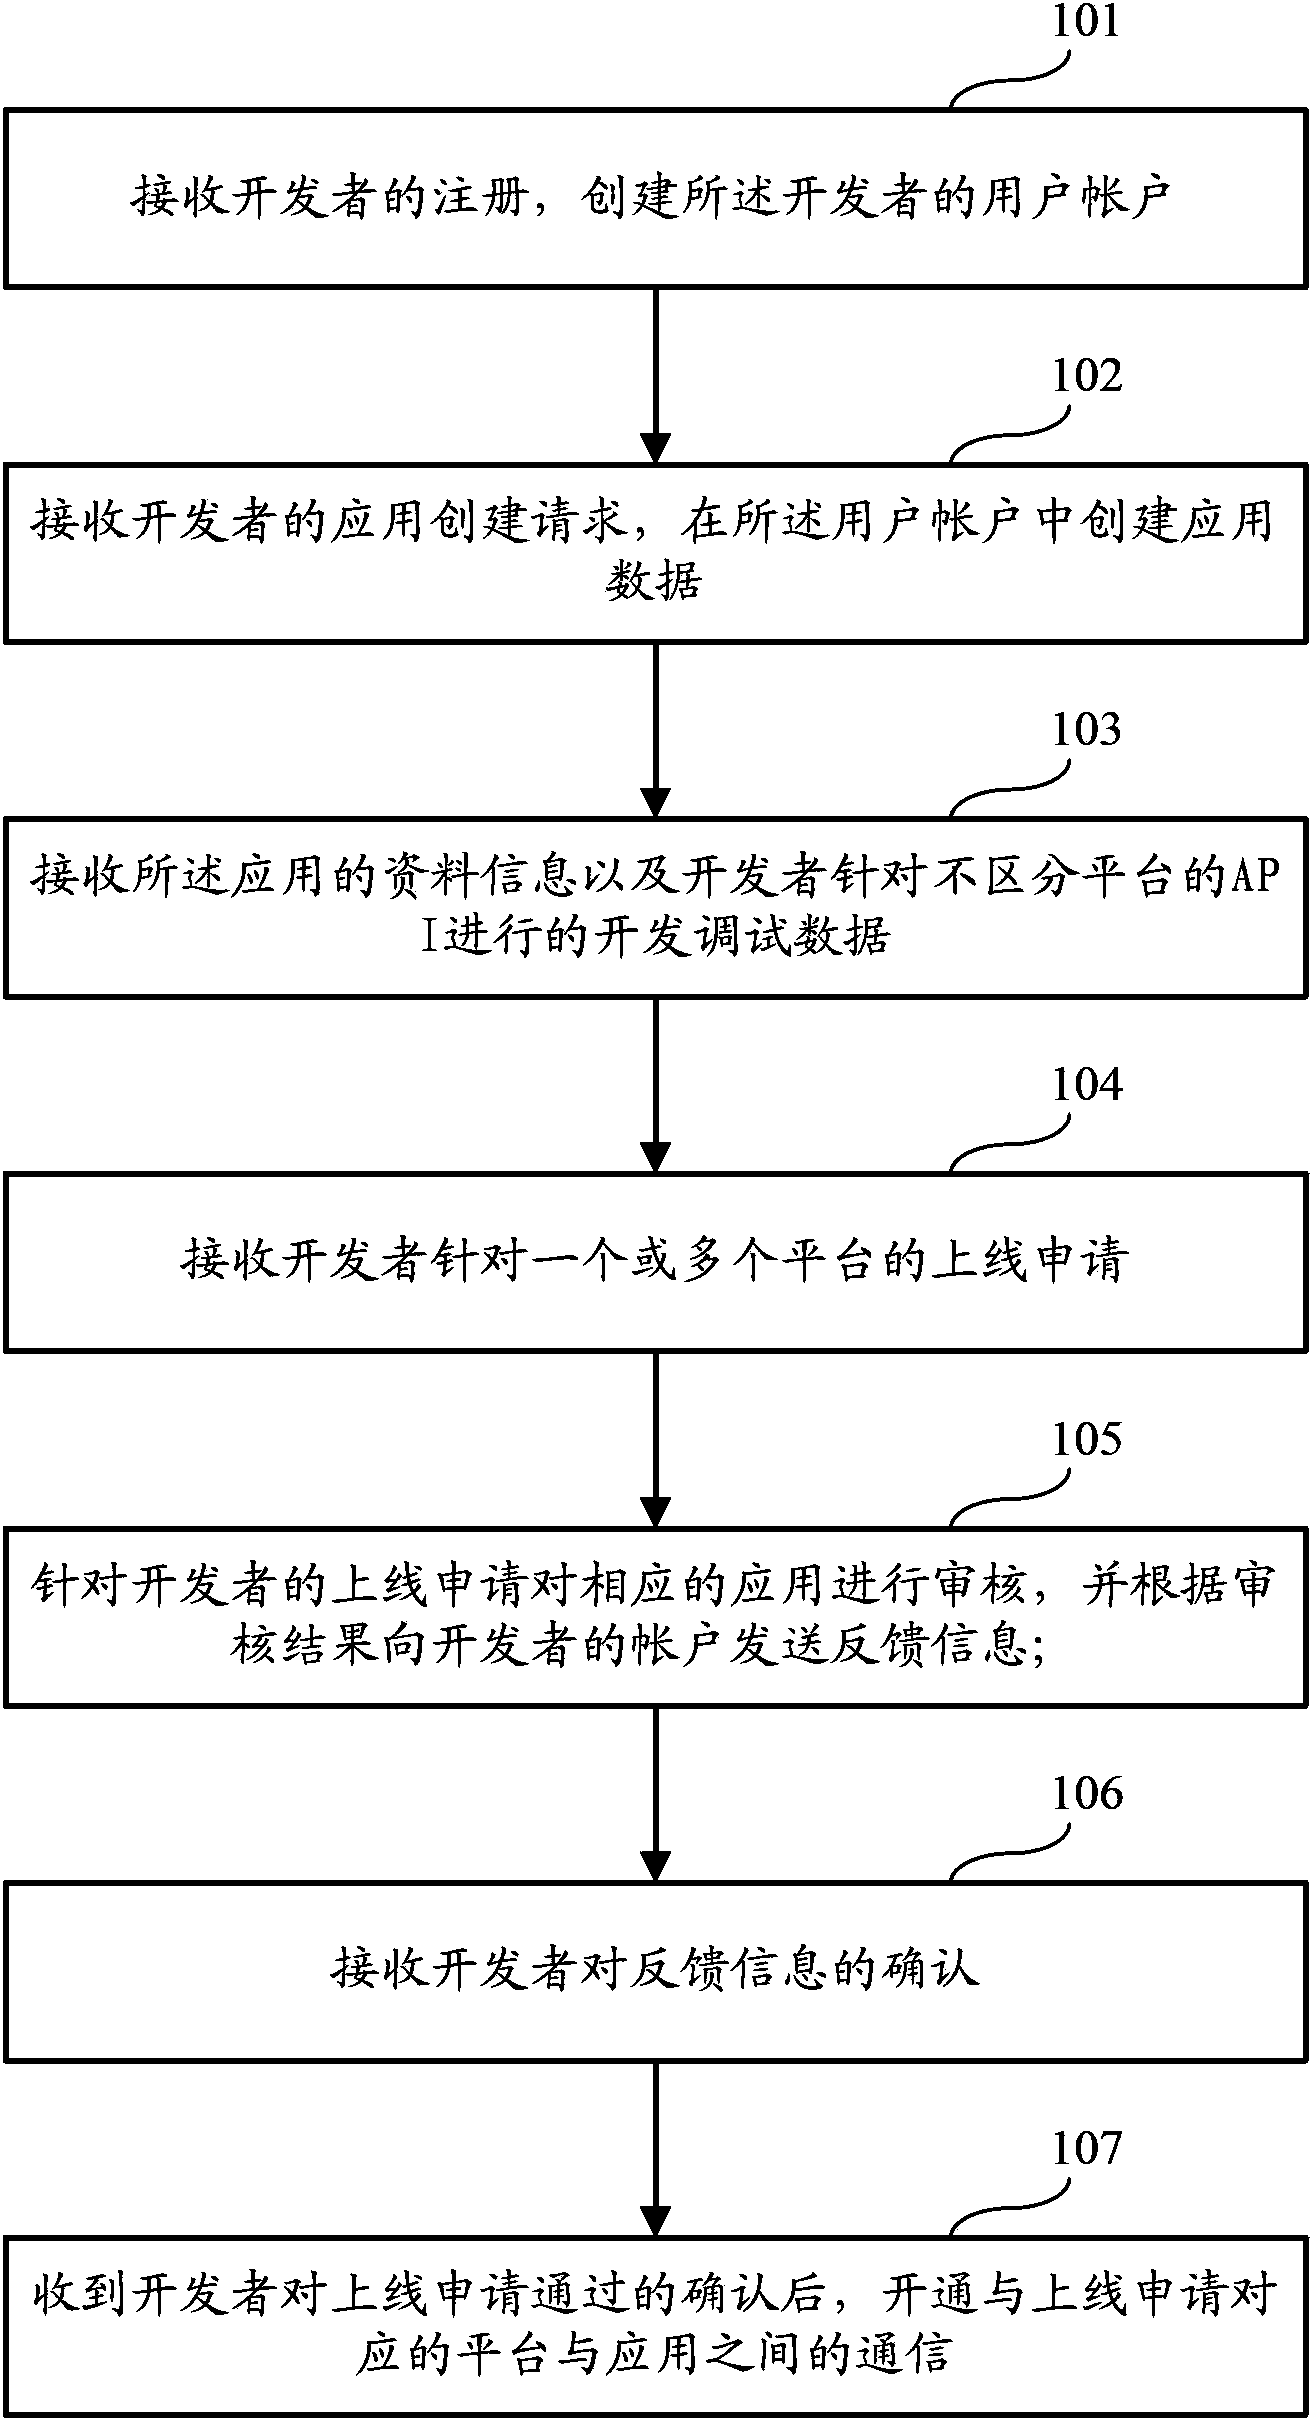 Multi-SNS platform unified access method and system applied by third party